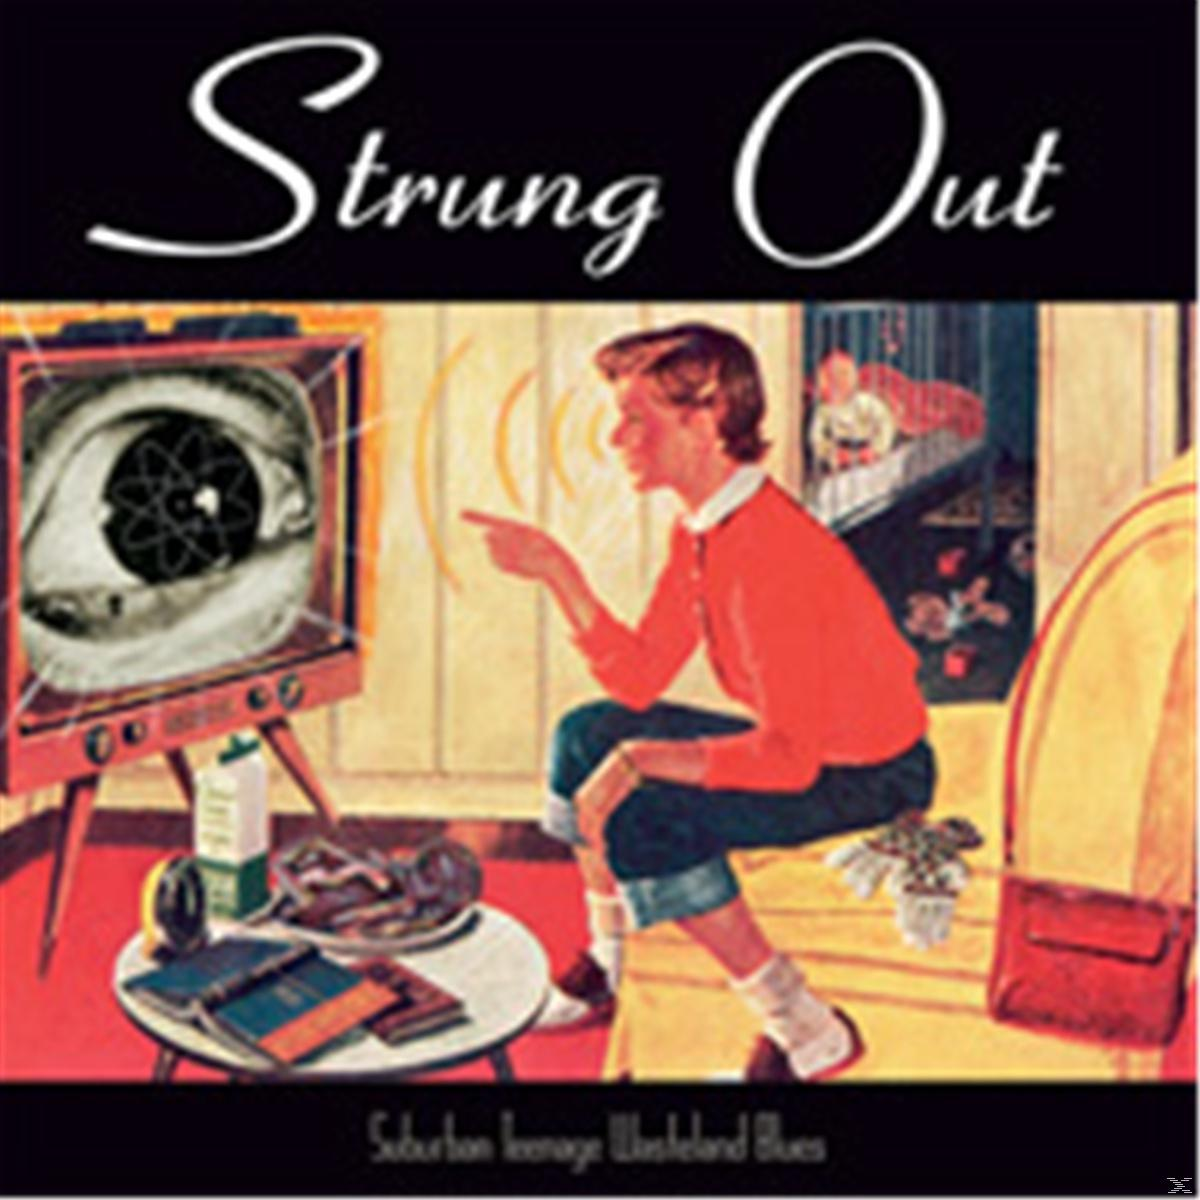 Strung Out - Suburban Wasteland - Teenage (Reissue) Blues (CD)